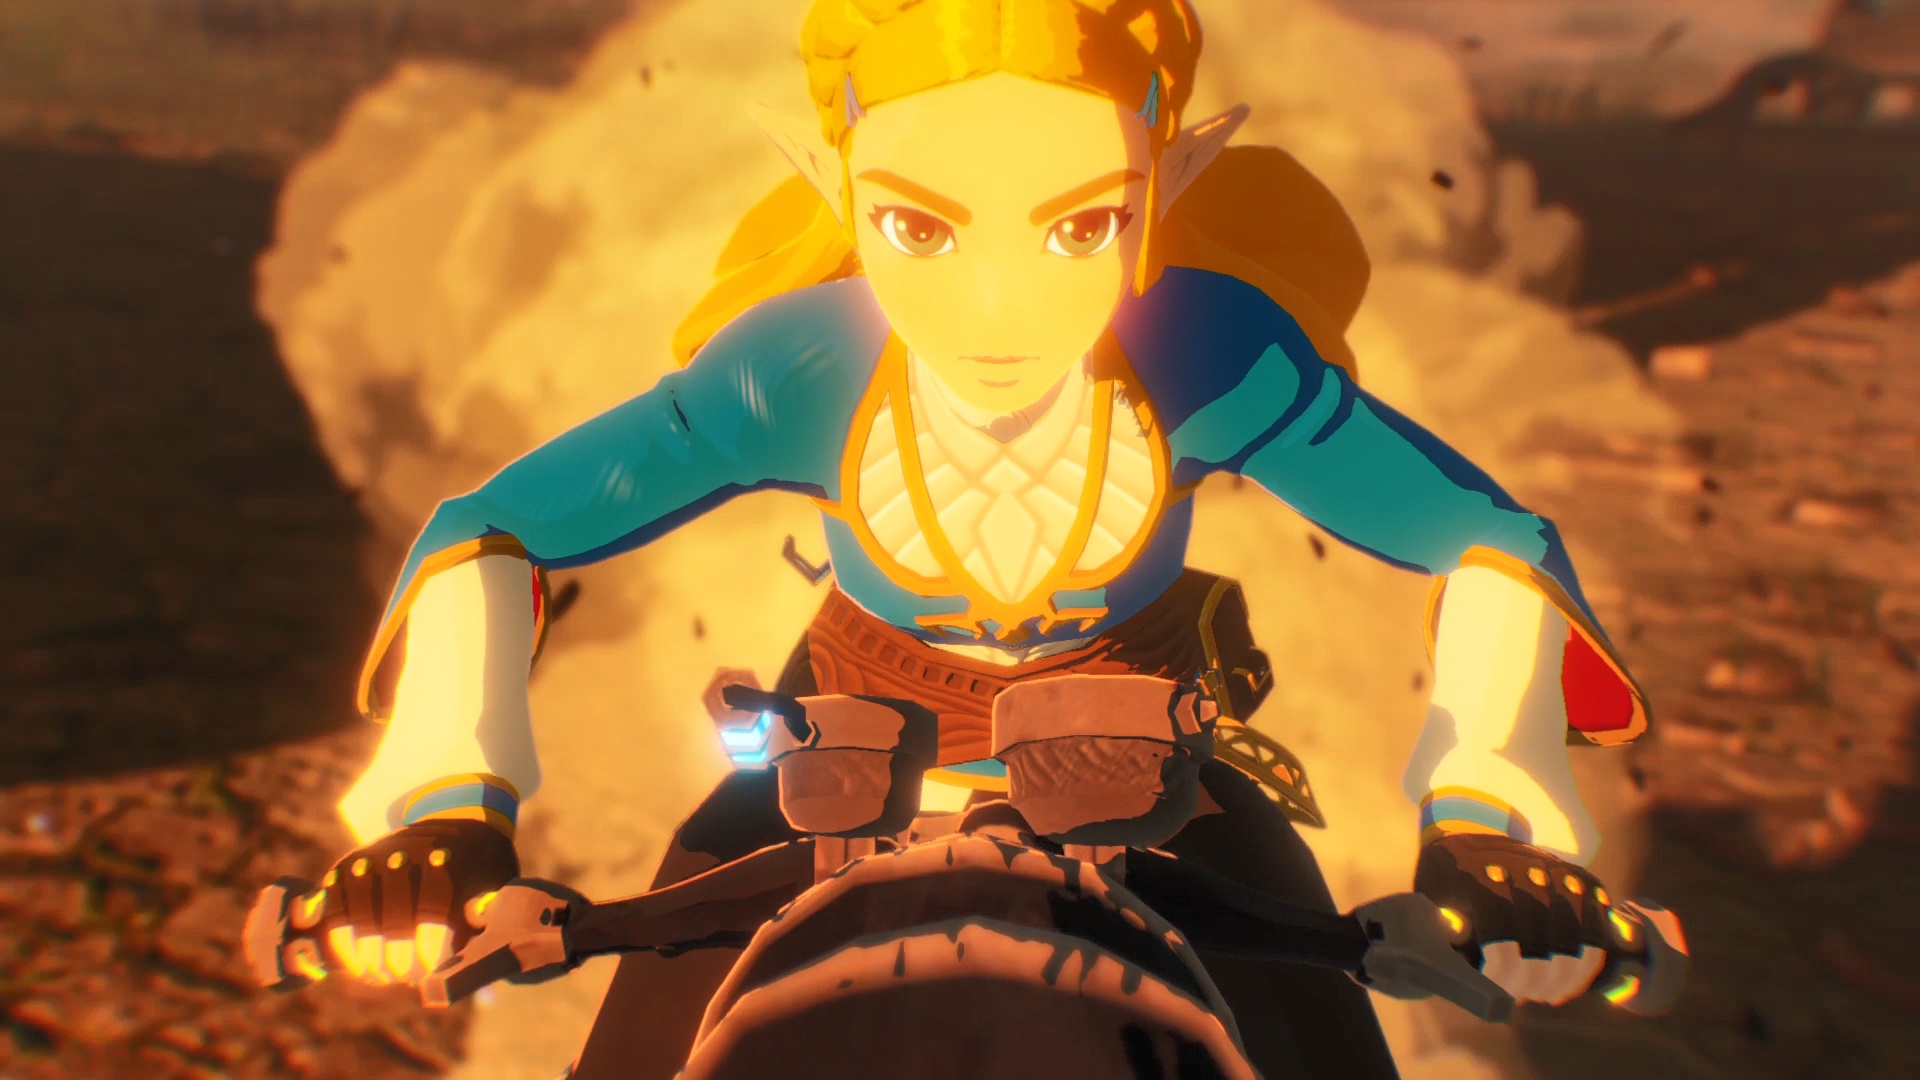 Zelda rides a motorcyle in Hyrule Warriors: Age of Calamity